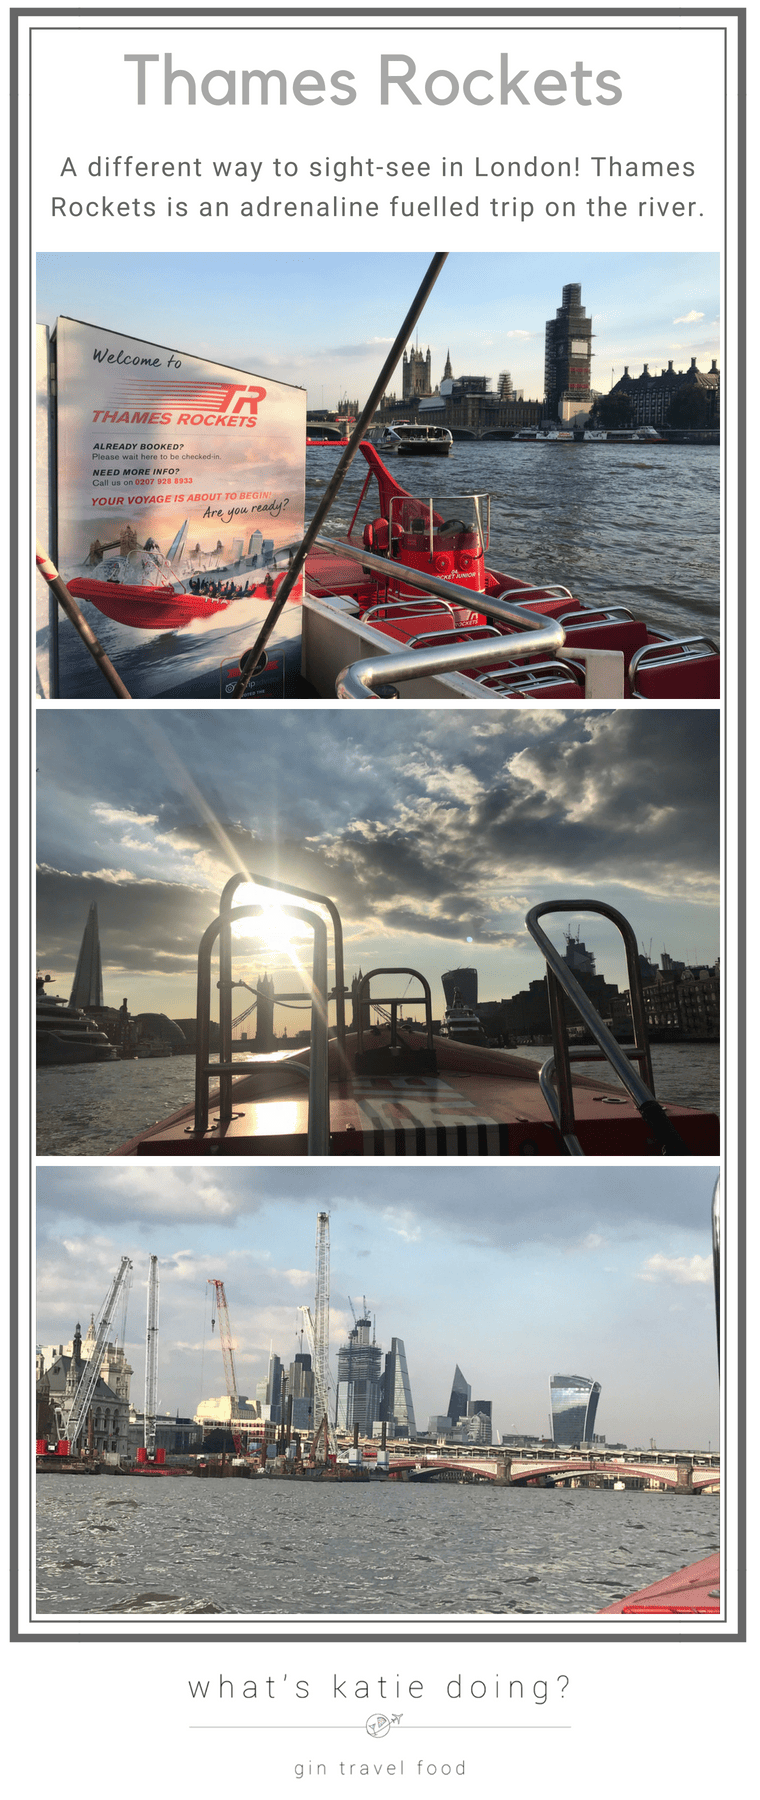 Thames Rockets - an alternative way to sigh-see in London